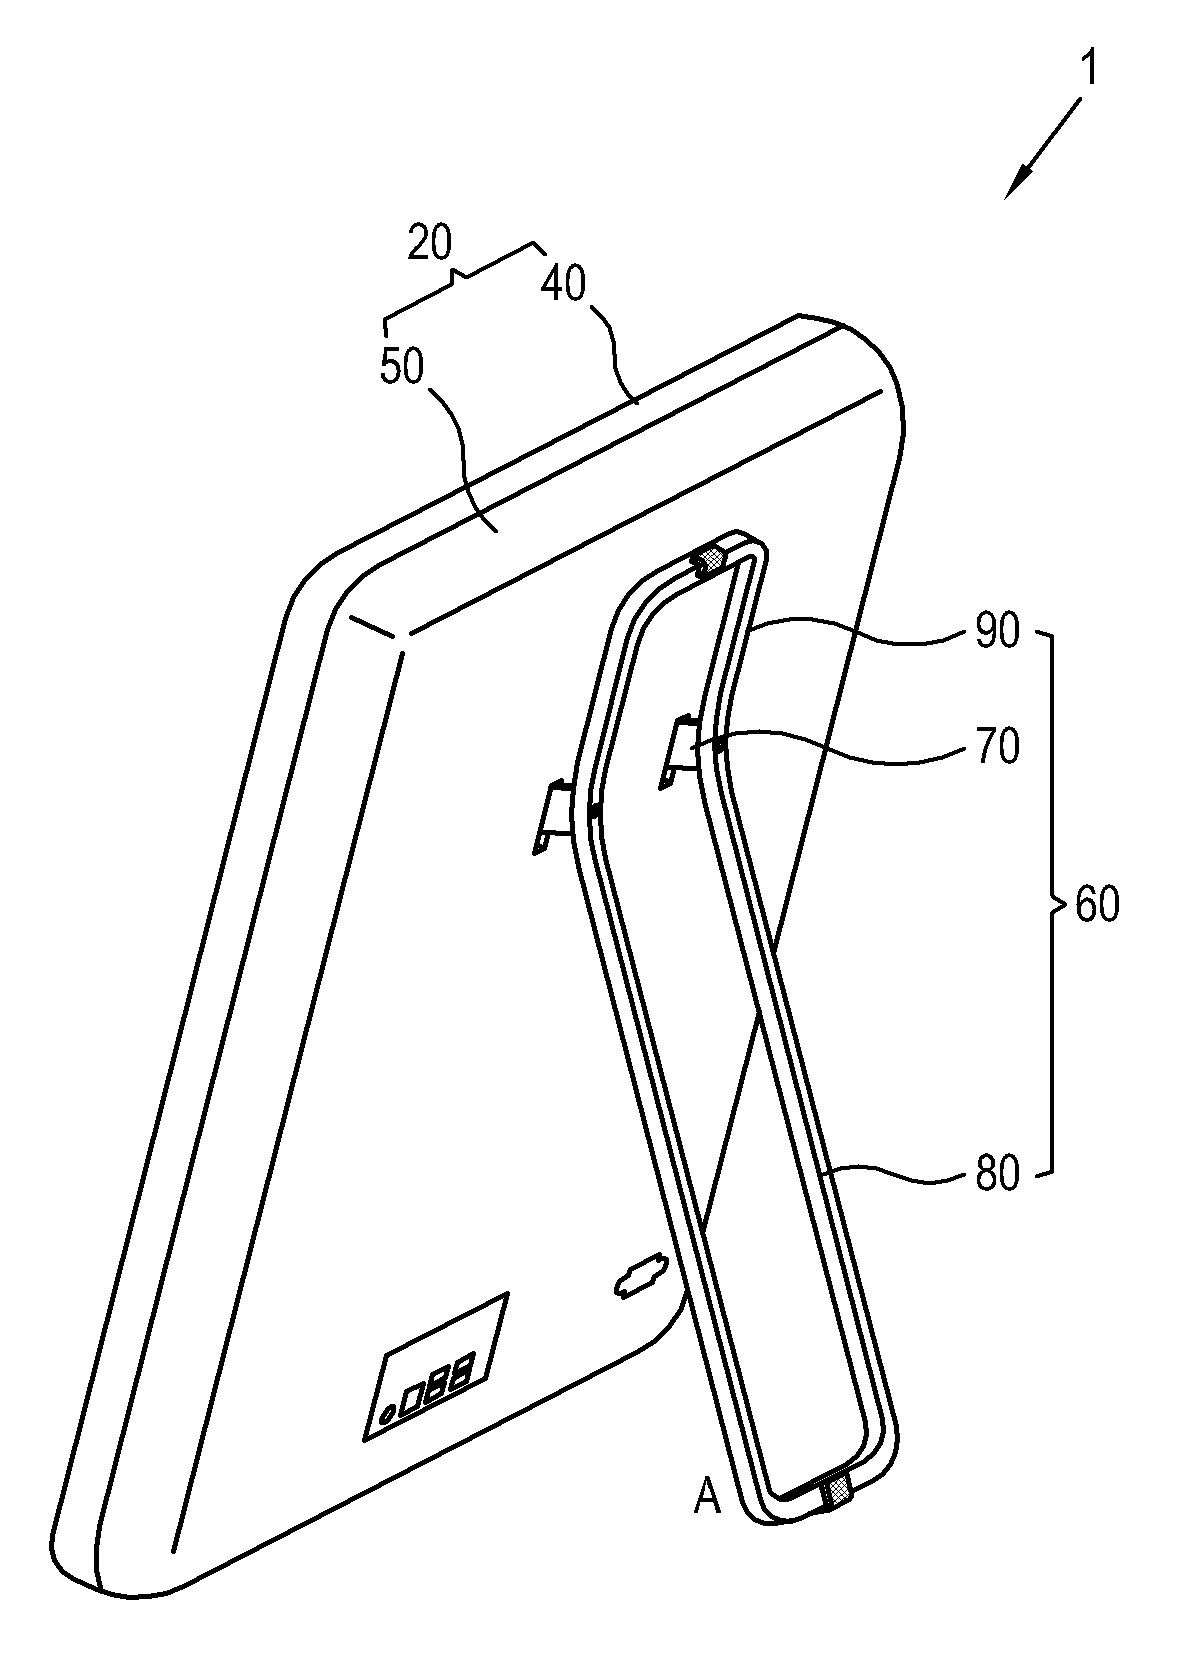 Electronic apparatus with stable support member system